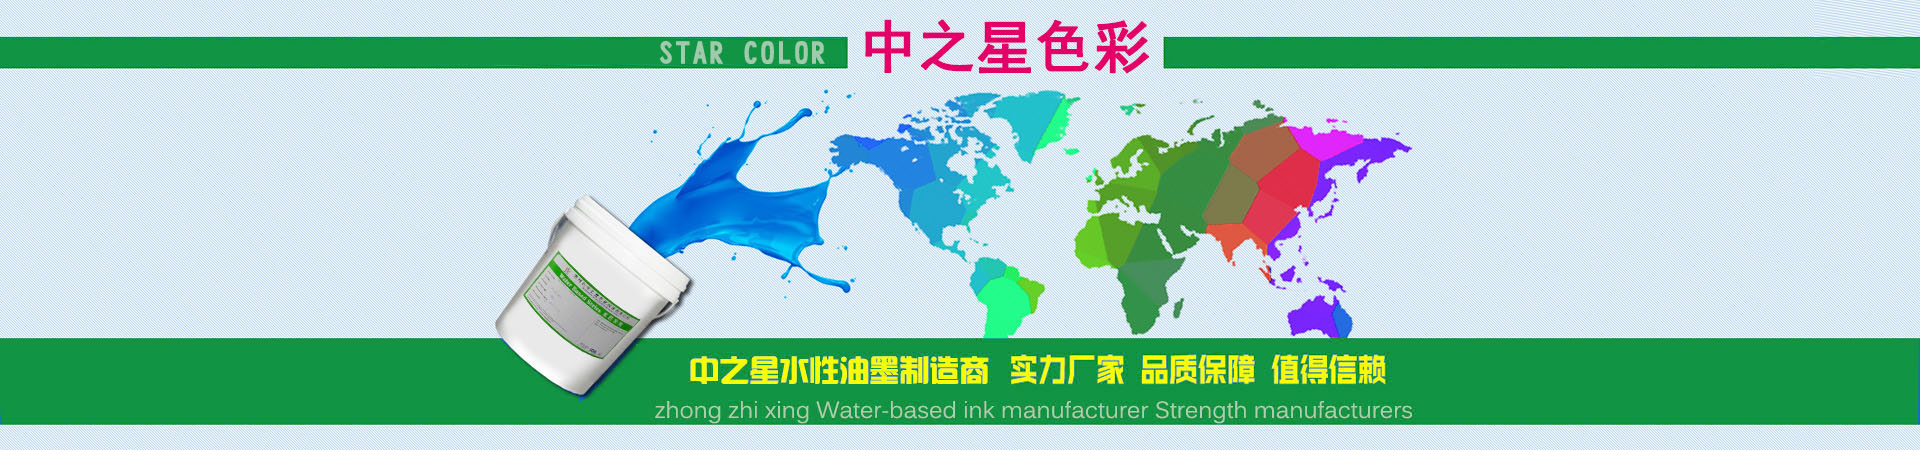 Star color water-based ink